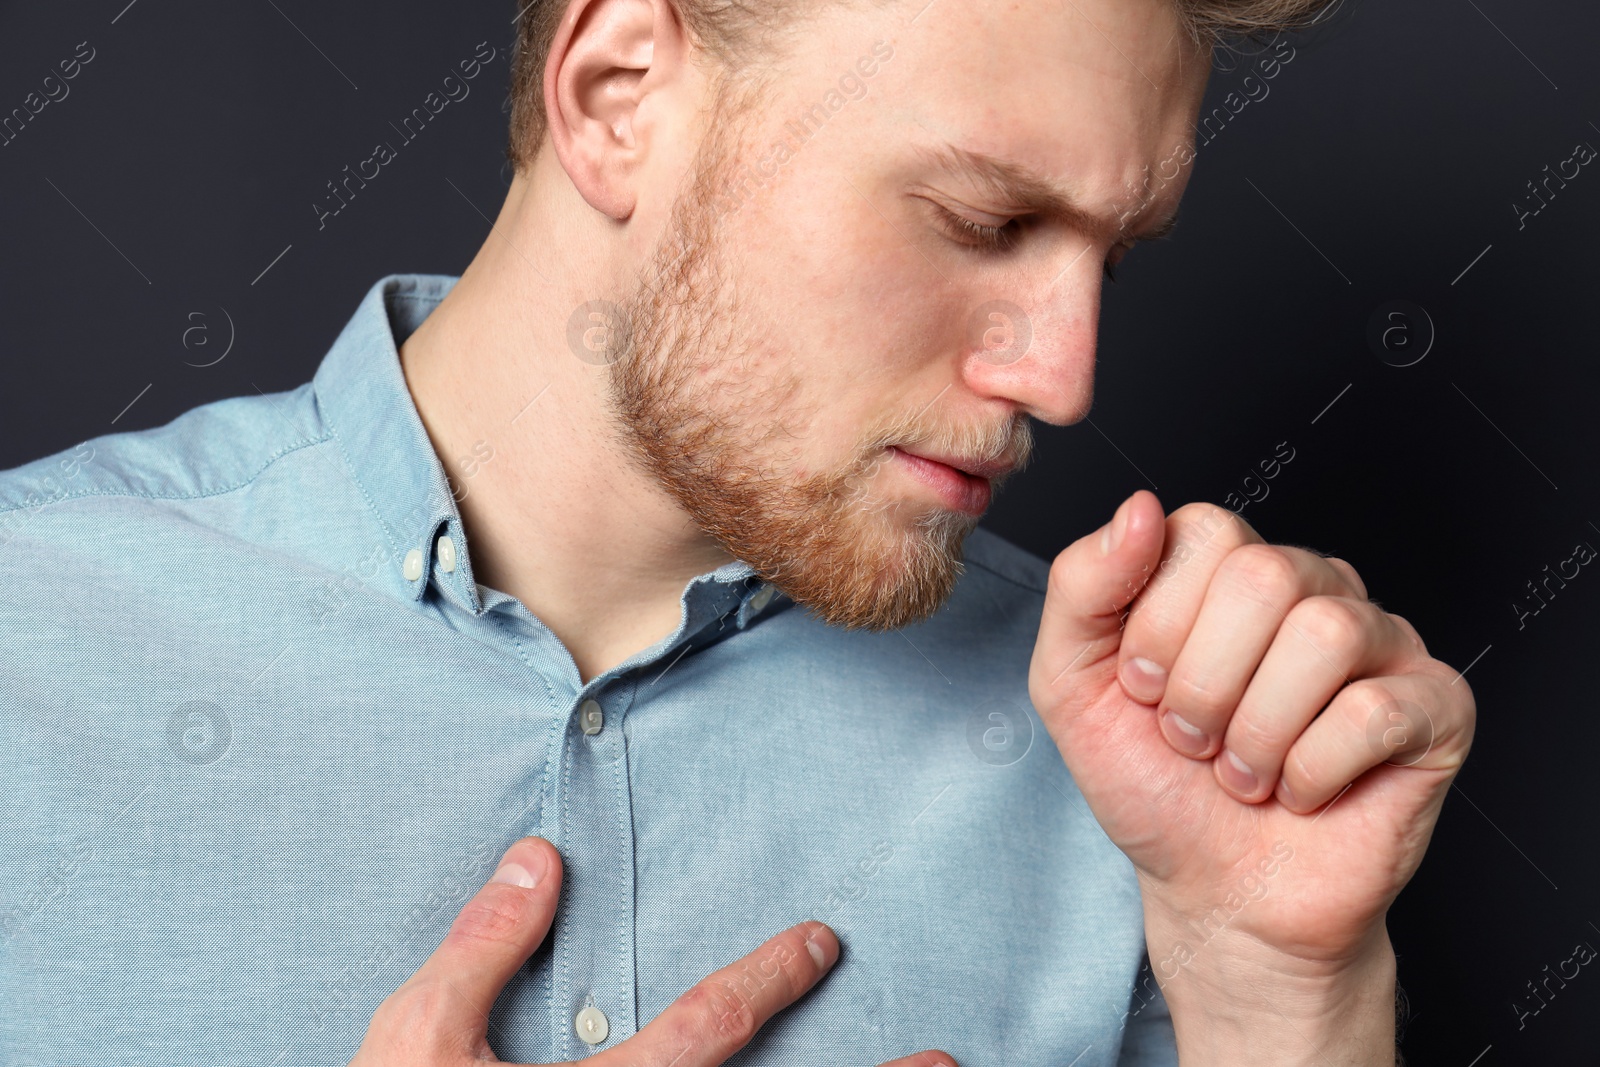 Photo of Handsome young man coughing against dark background